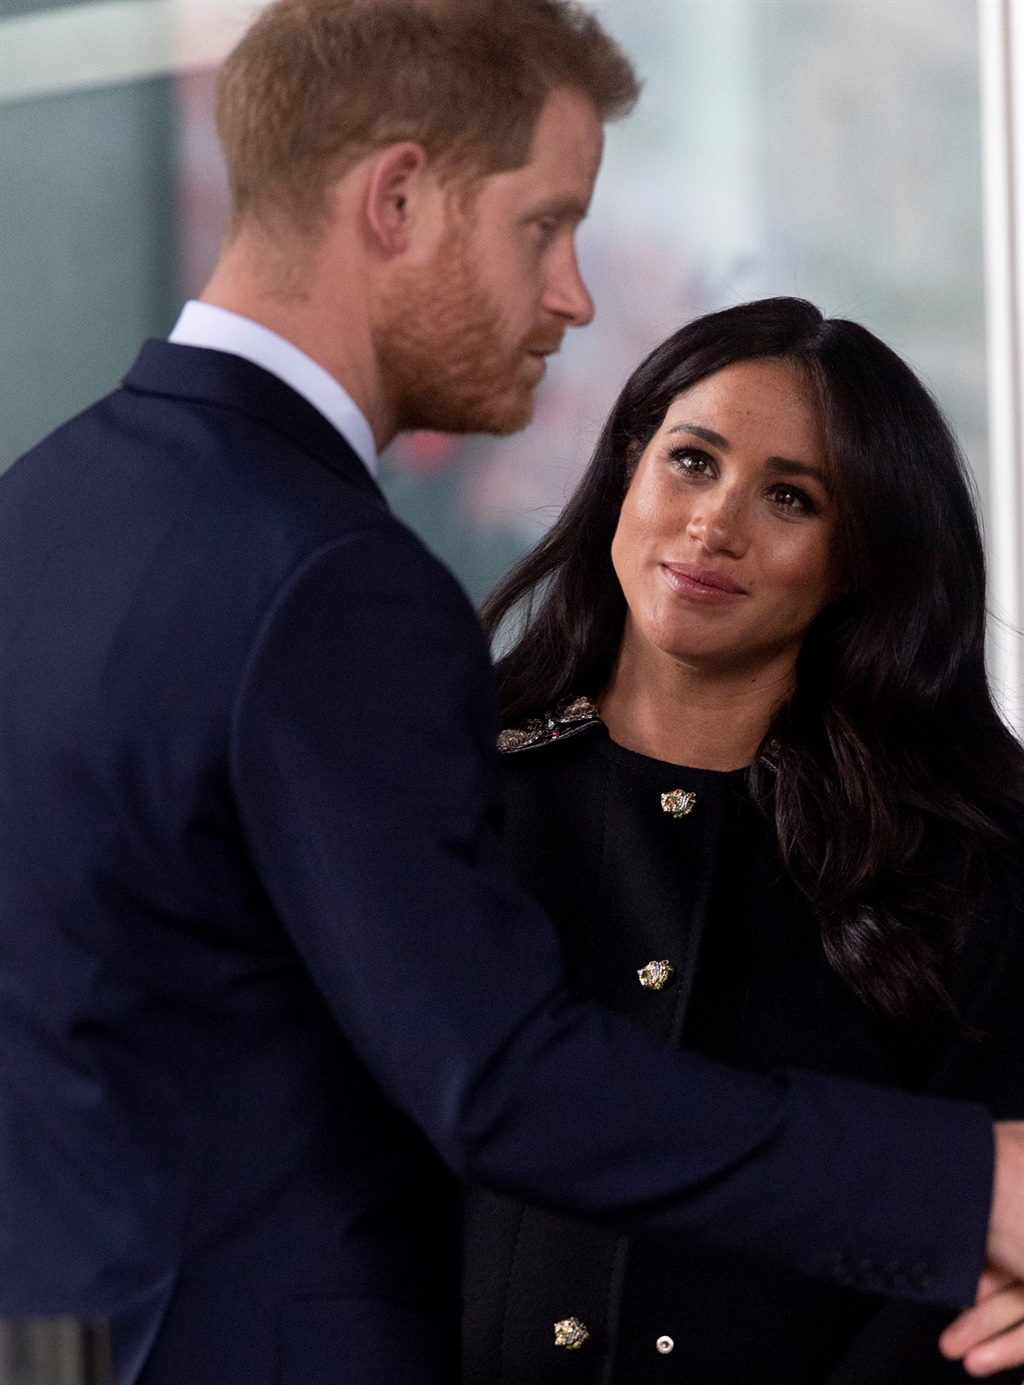 Prince Harry, Duke of Sussex and Meghan, Duchess of Sussex at New Zealand House on March 19, 2019 in London, England. The visit was following the recent terror attack which saw at least 50 people killed at a Mosque in Christchurch